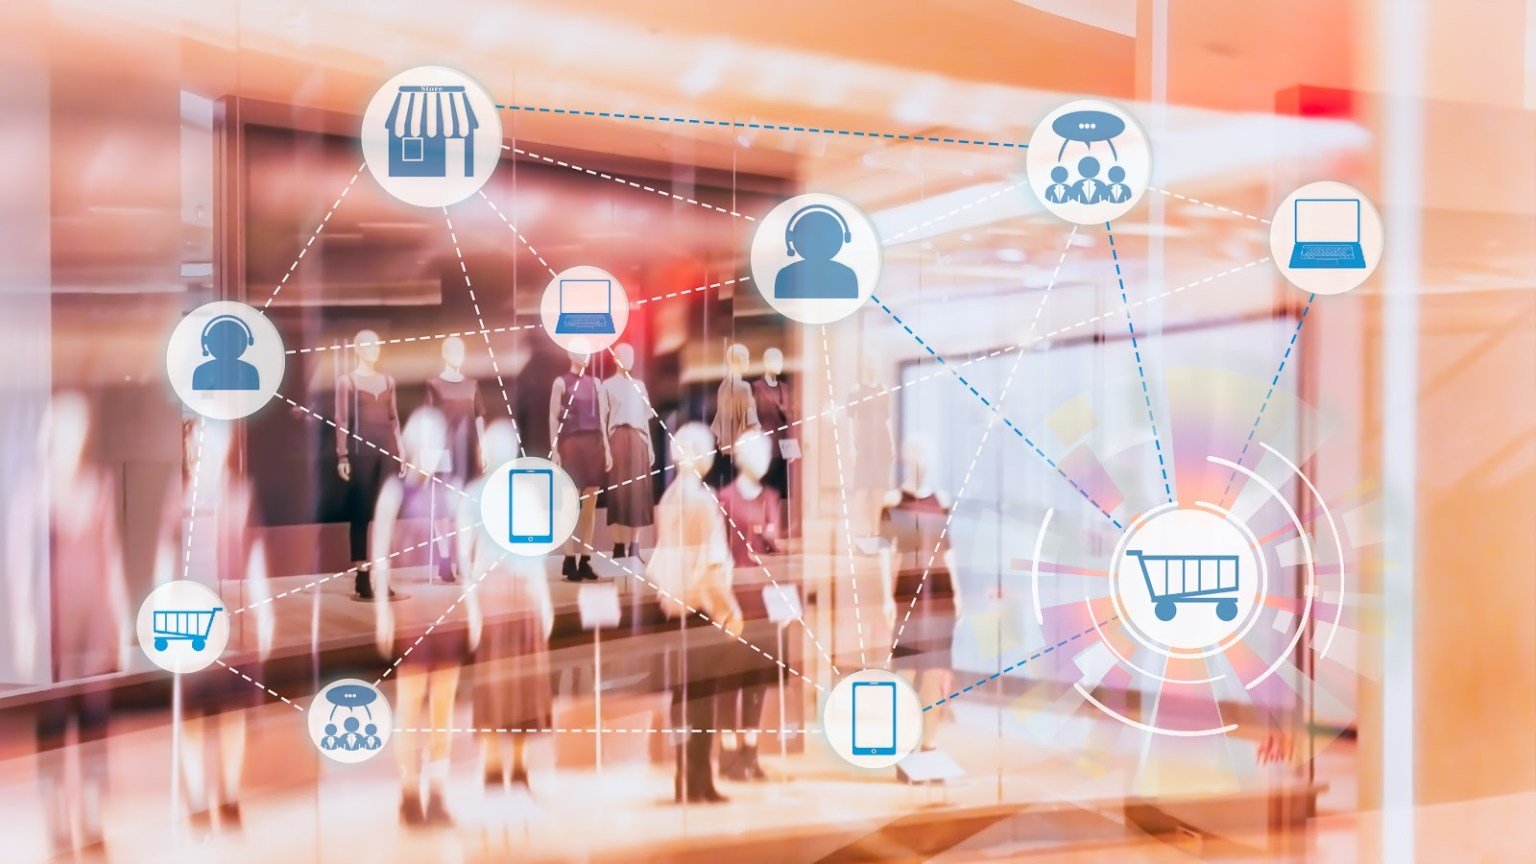 The future of omnichannel in retail